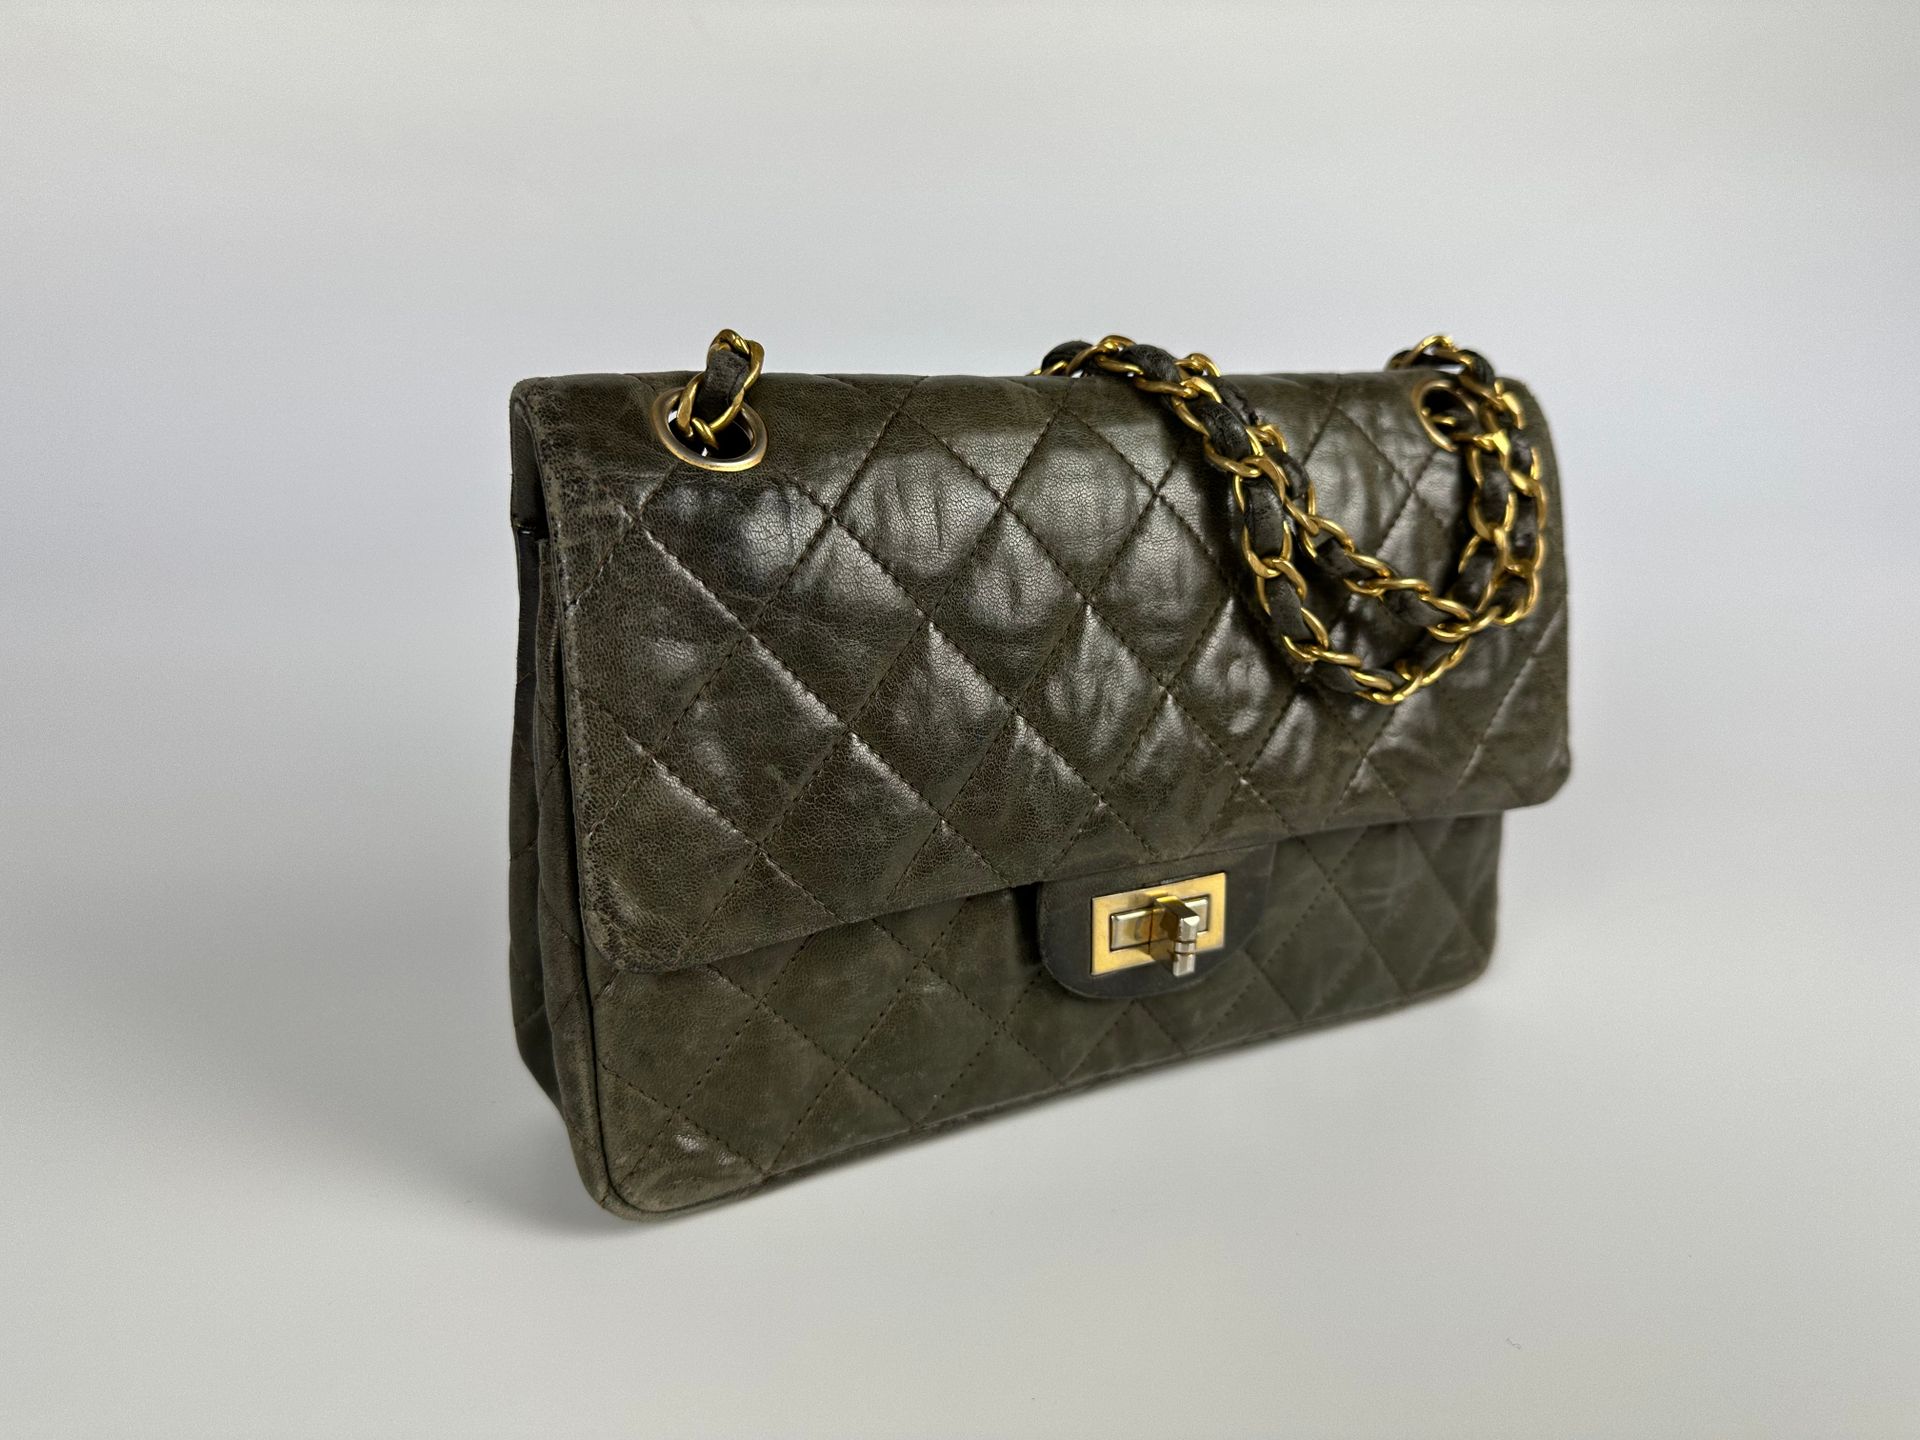 CHANEL 2.55 bag in green bronze quilted leather and leat…